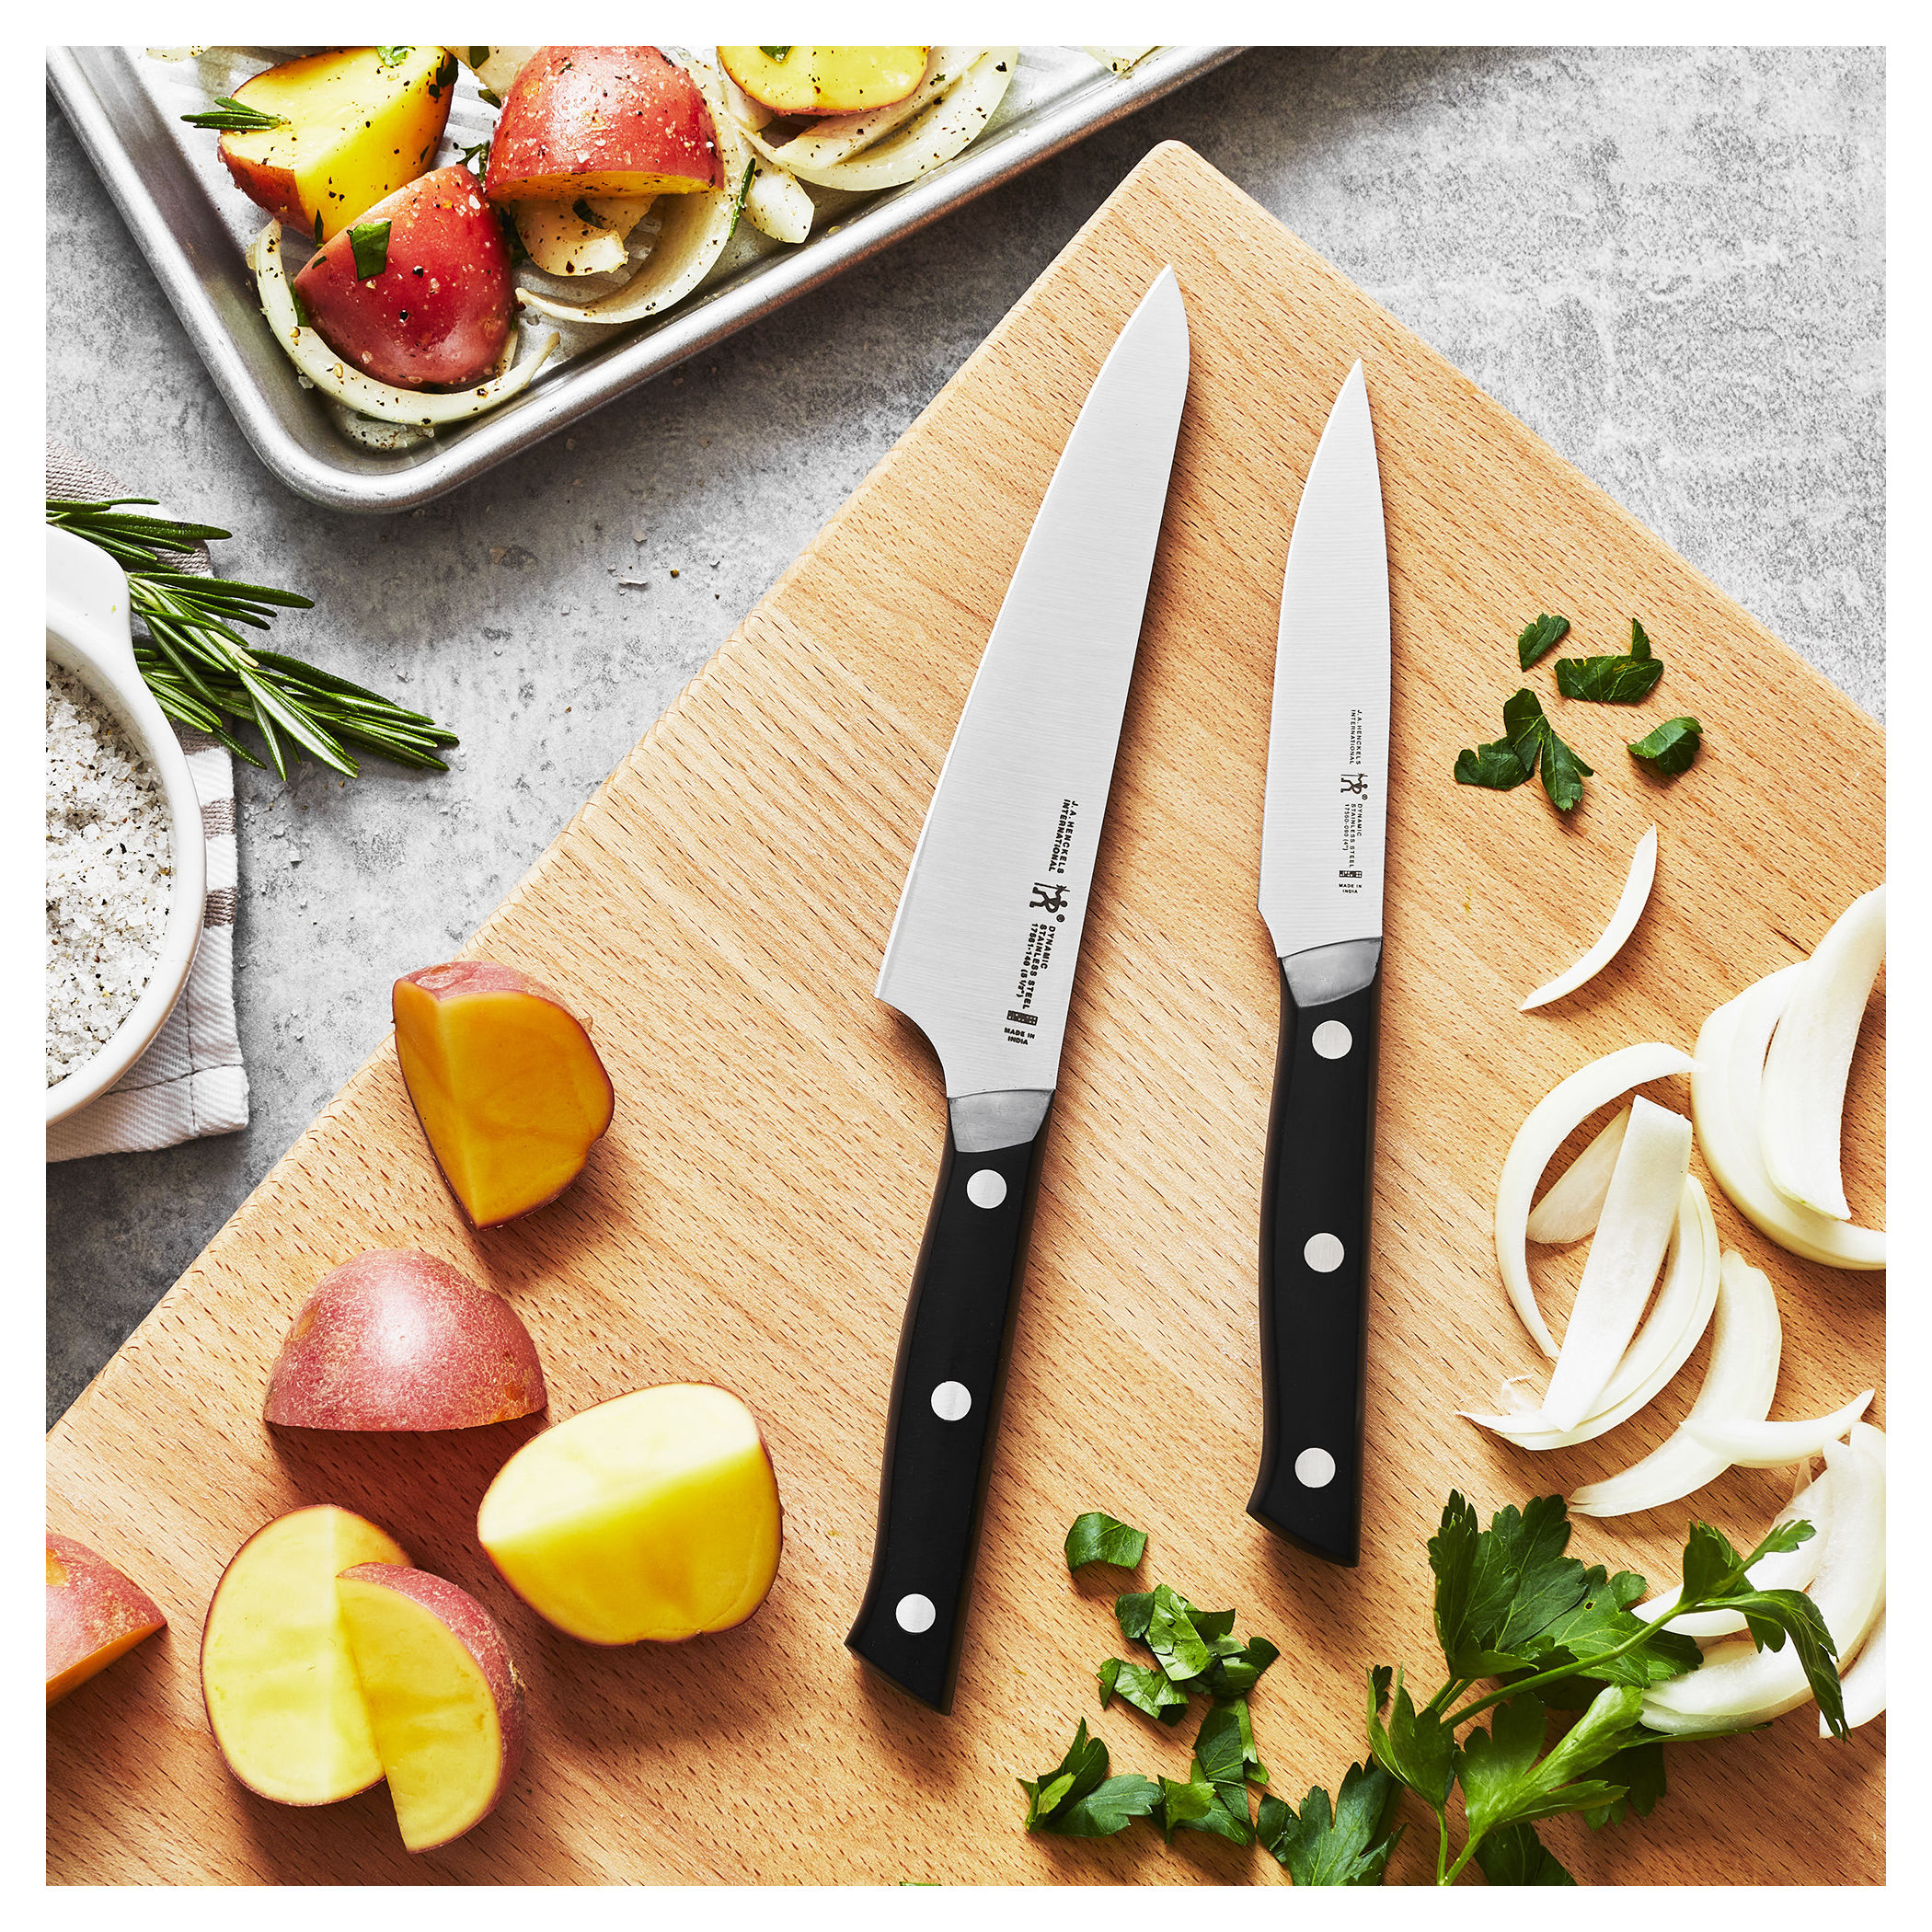 HENCKELS Premium Quality 20-Piece Knife Set with Block, Razor-Sharp, German  Engineered Knife Informed by over 100 Years of Masterful Knife Making